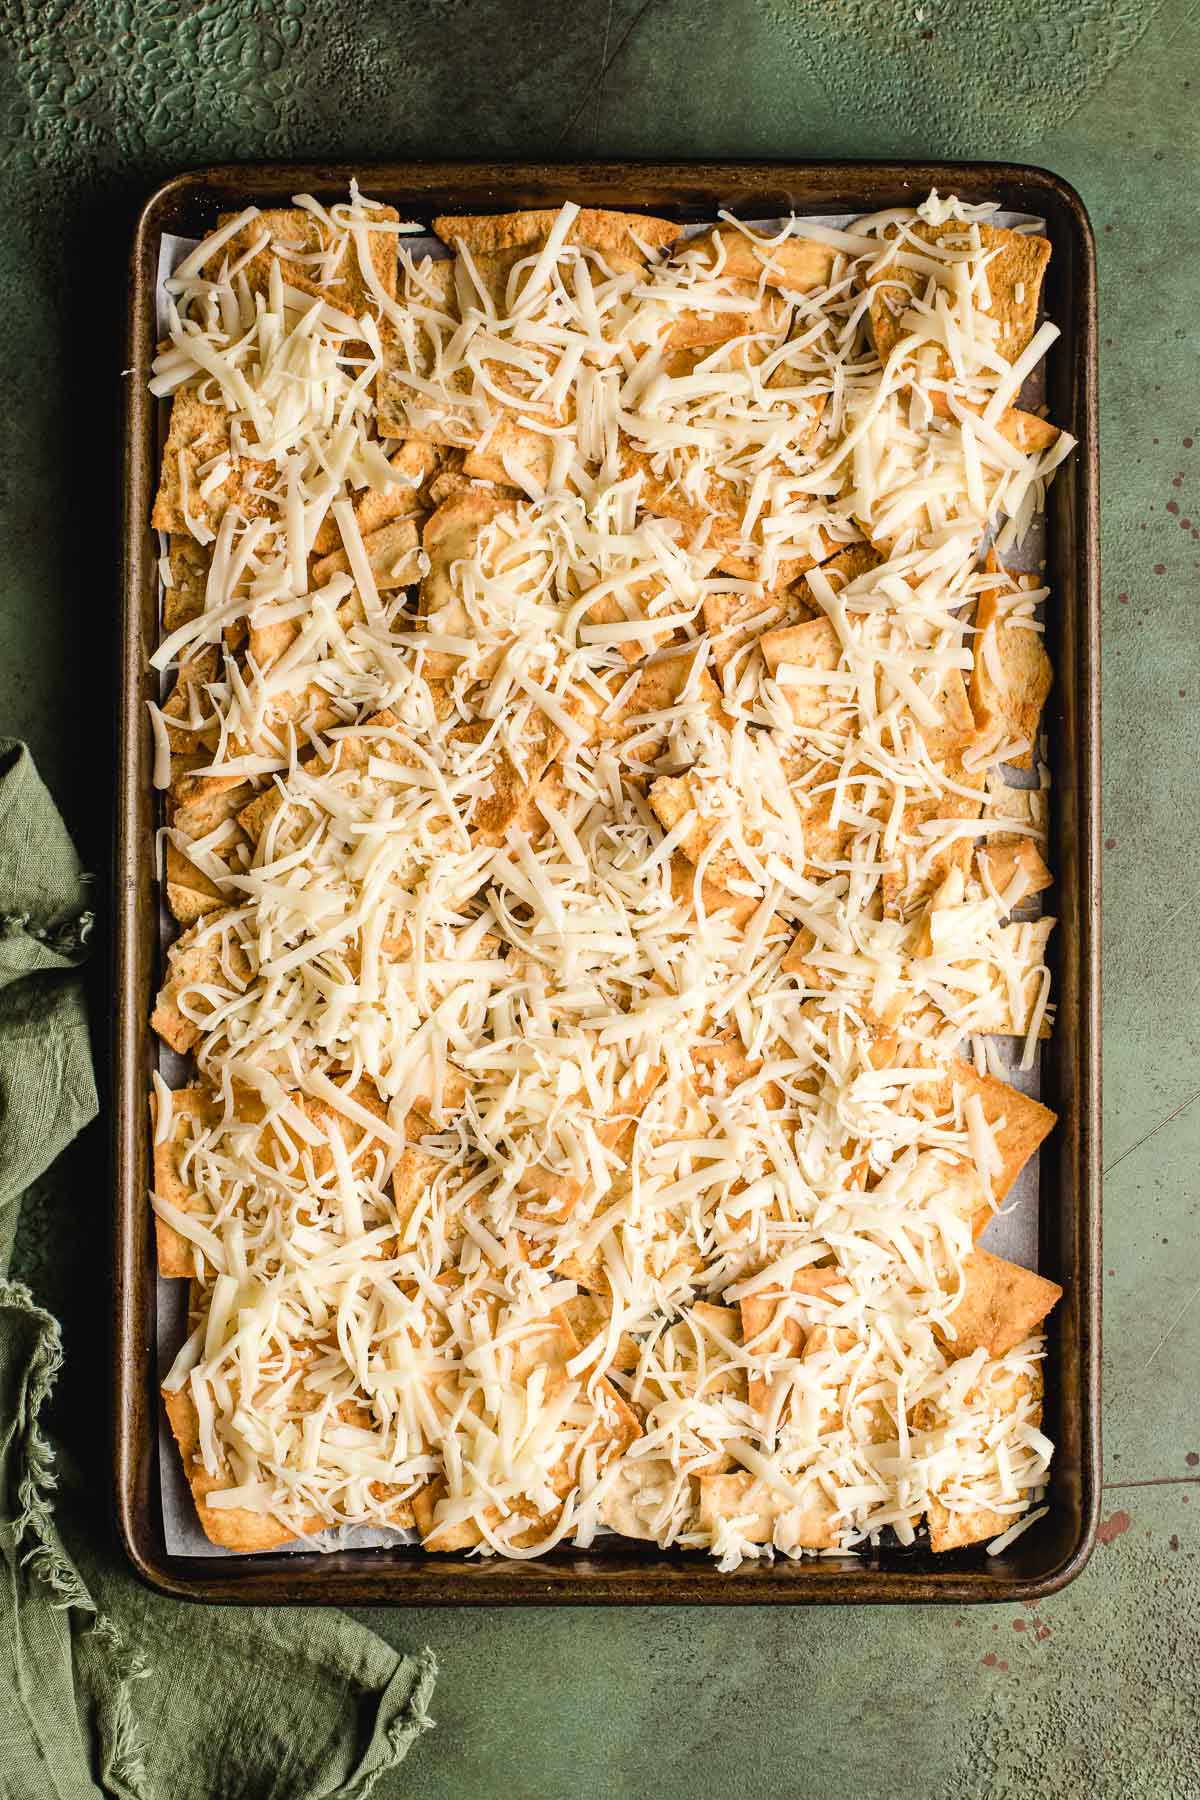 Sheet pan topped with pita chips and shredded Italian blend cheese.